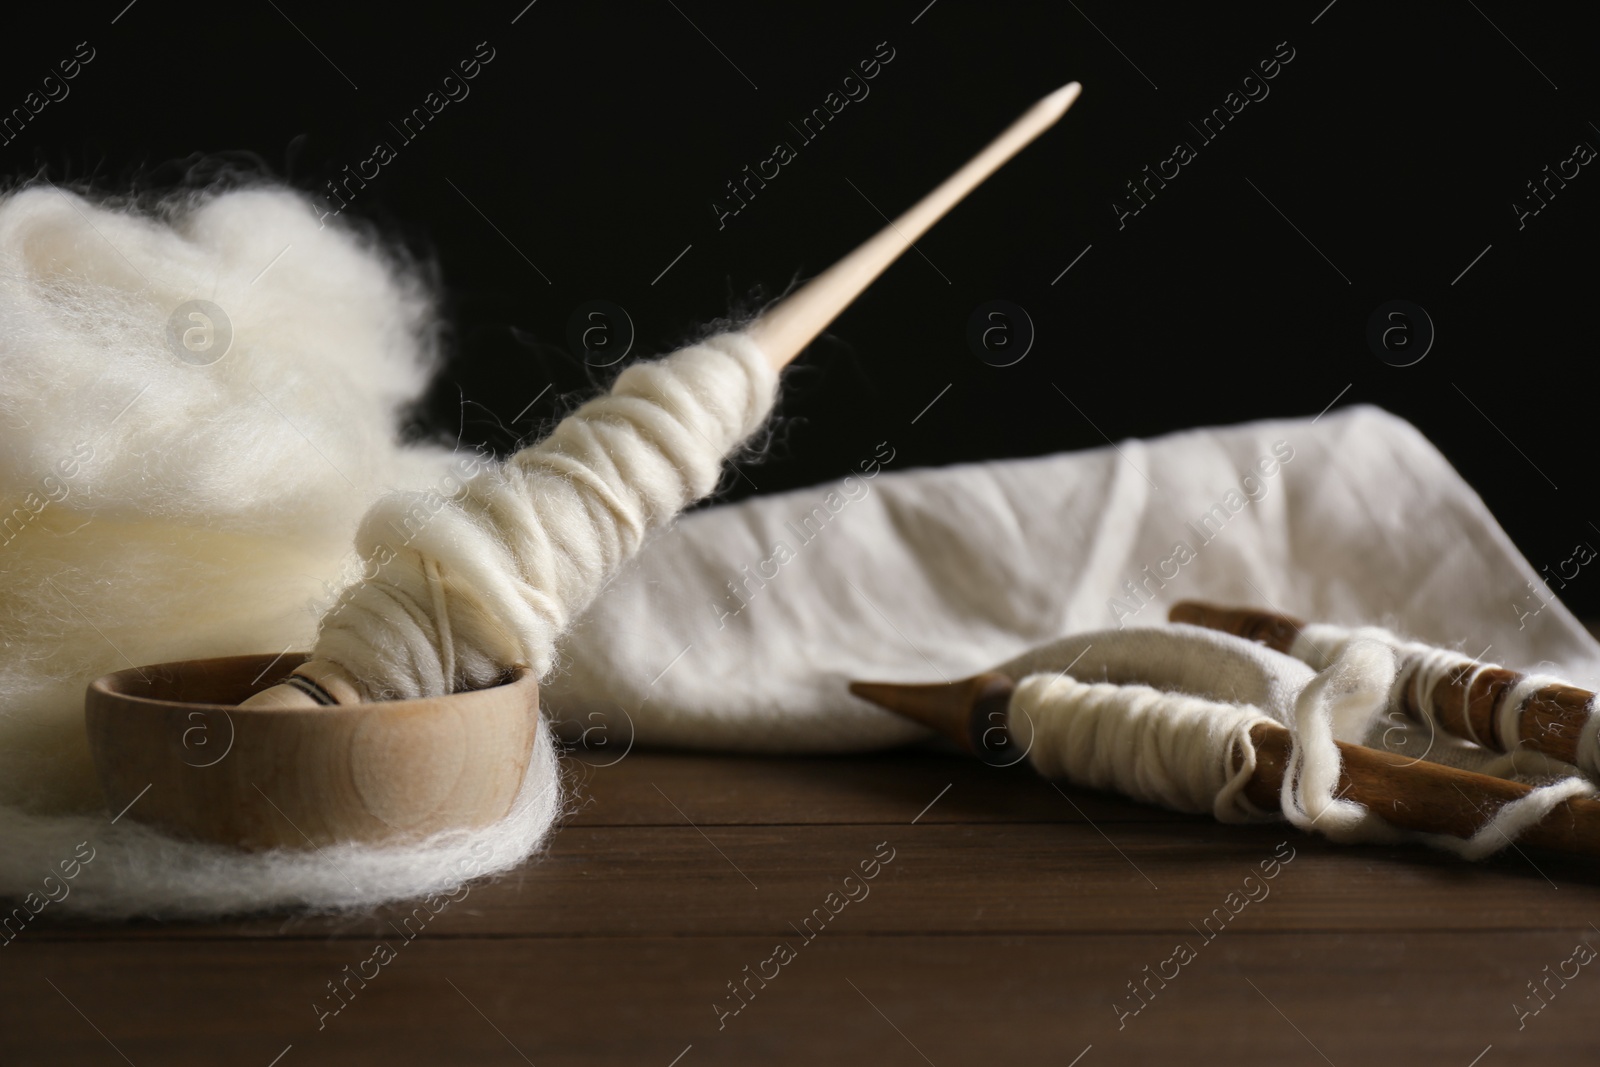 Photo of Spindles and soft white wool on wooden table